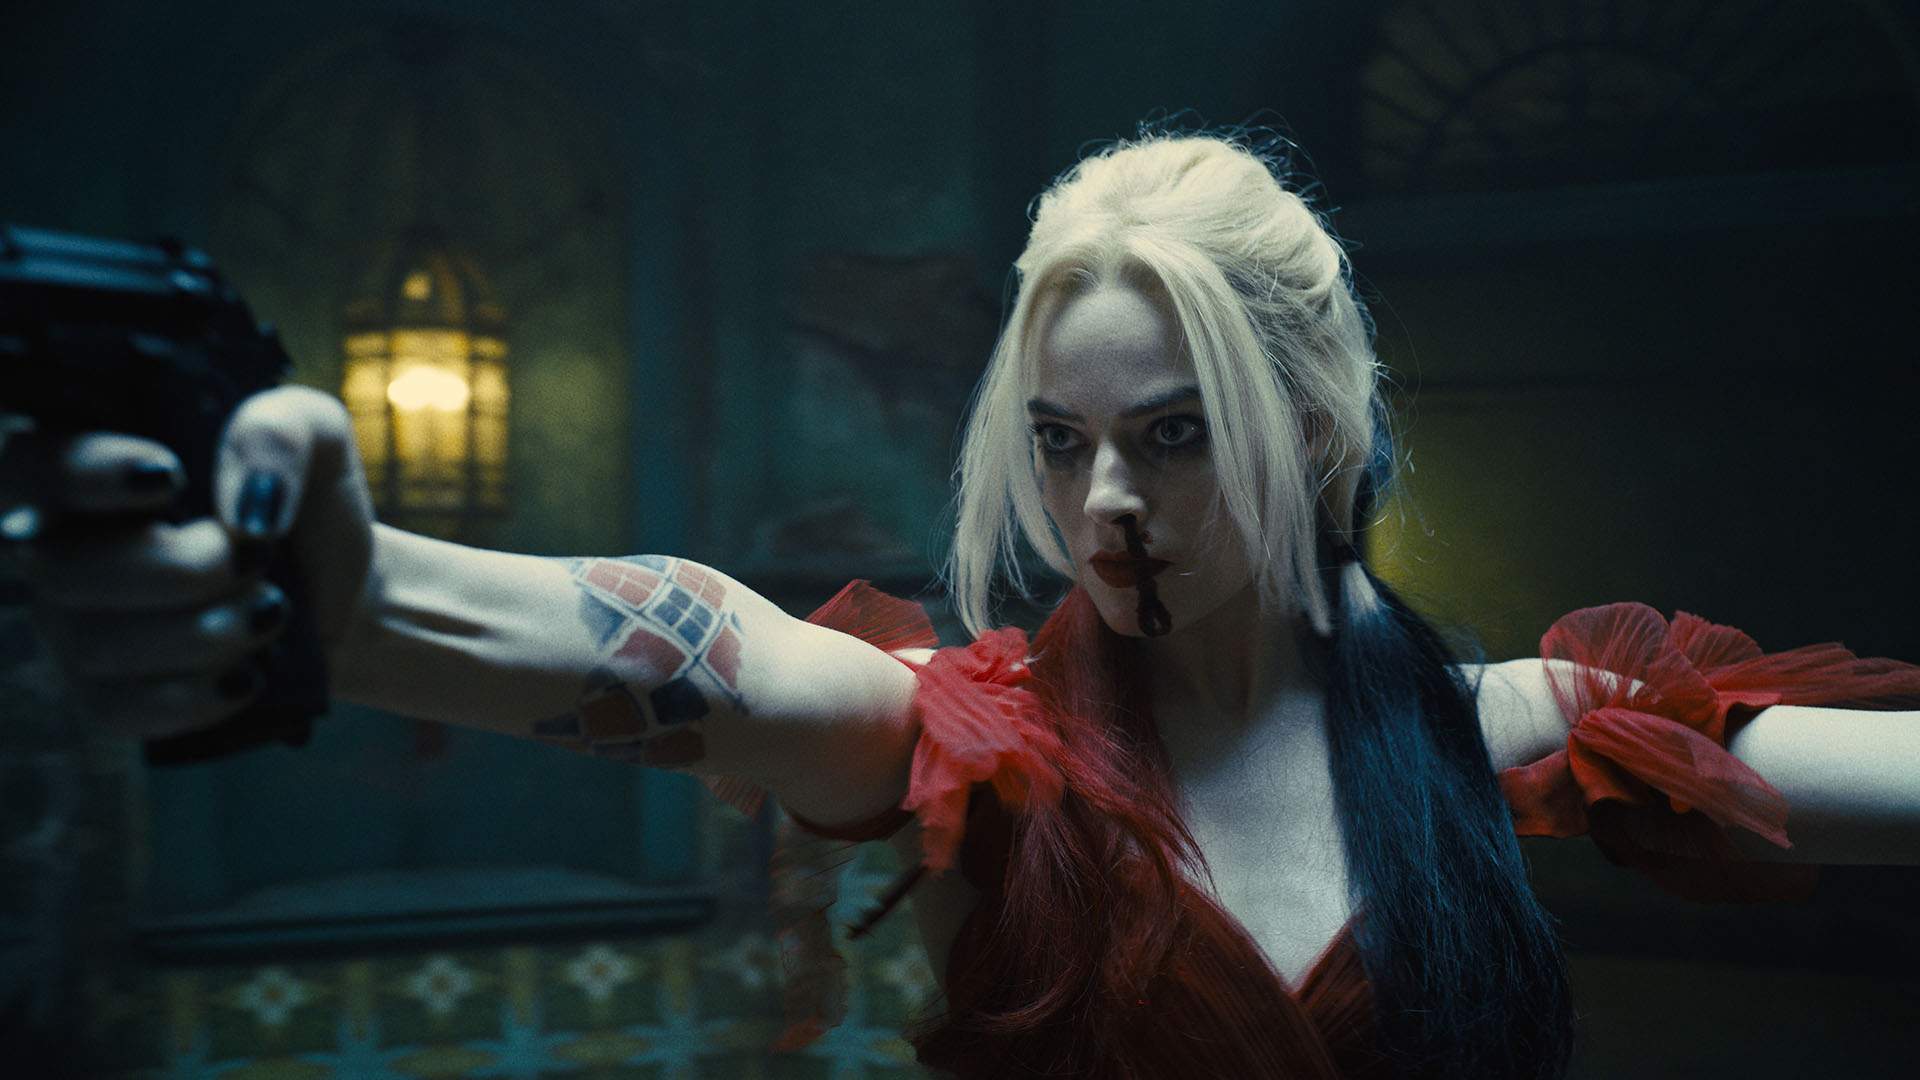 'The Suicide Squad' Is the Latest Big Flick That's Being Fast-Tracked From Cinemas to Digital